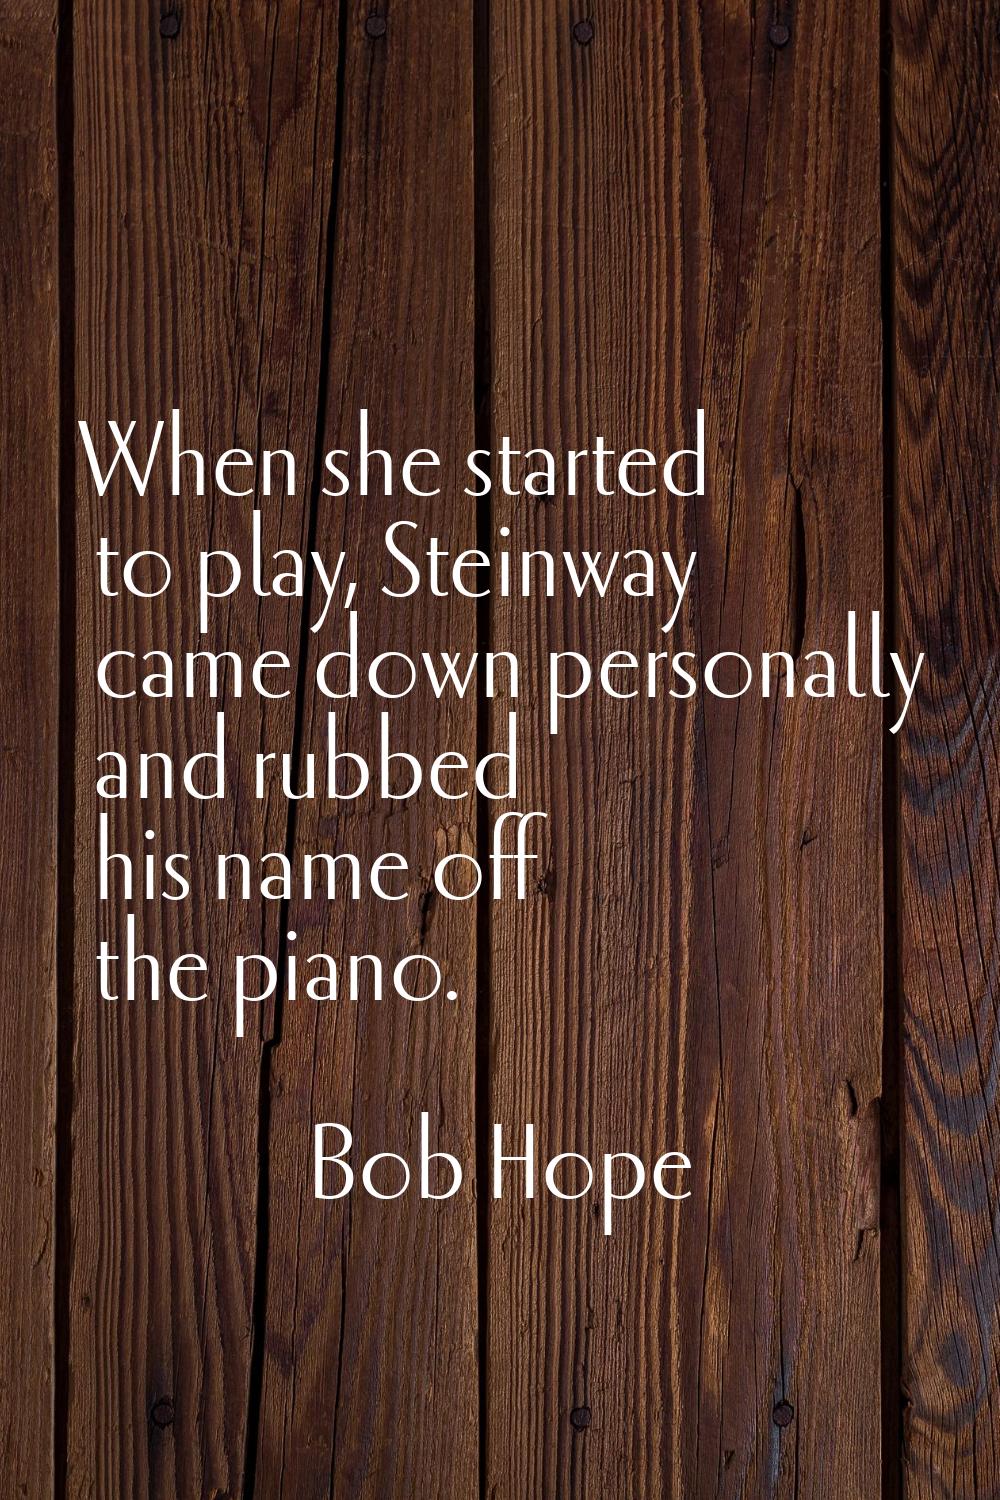 When she started to play, Steinway came down personally and rubbed his name off the piano.